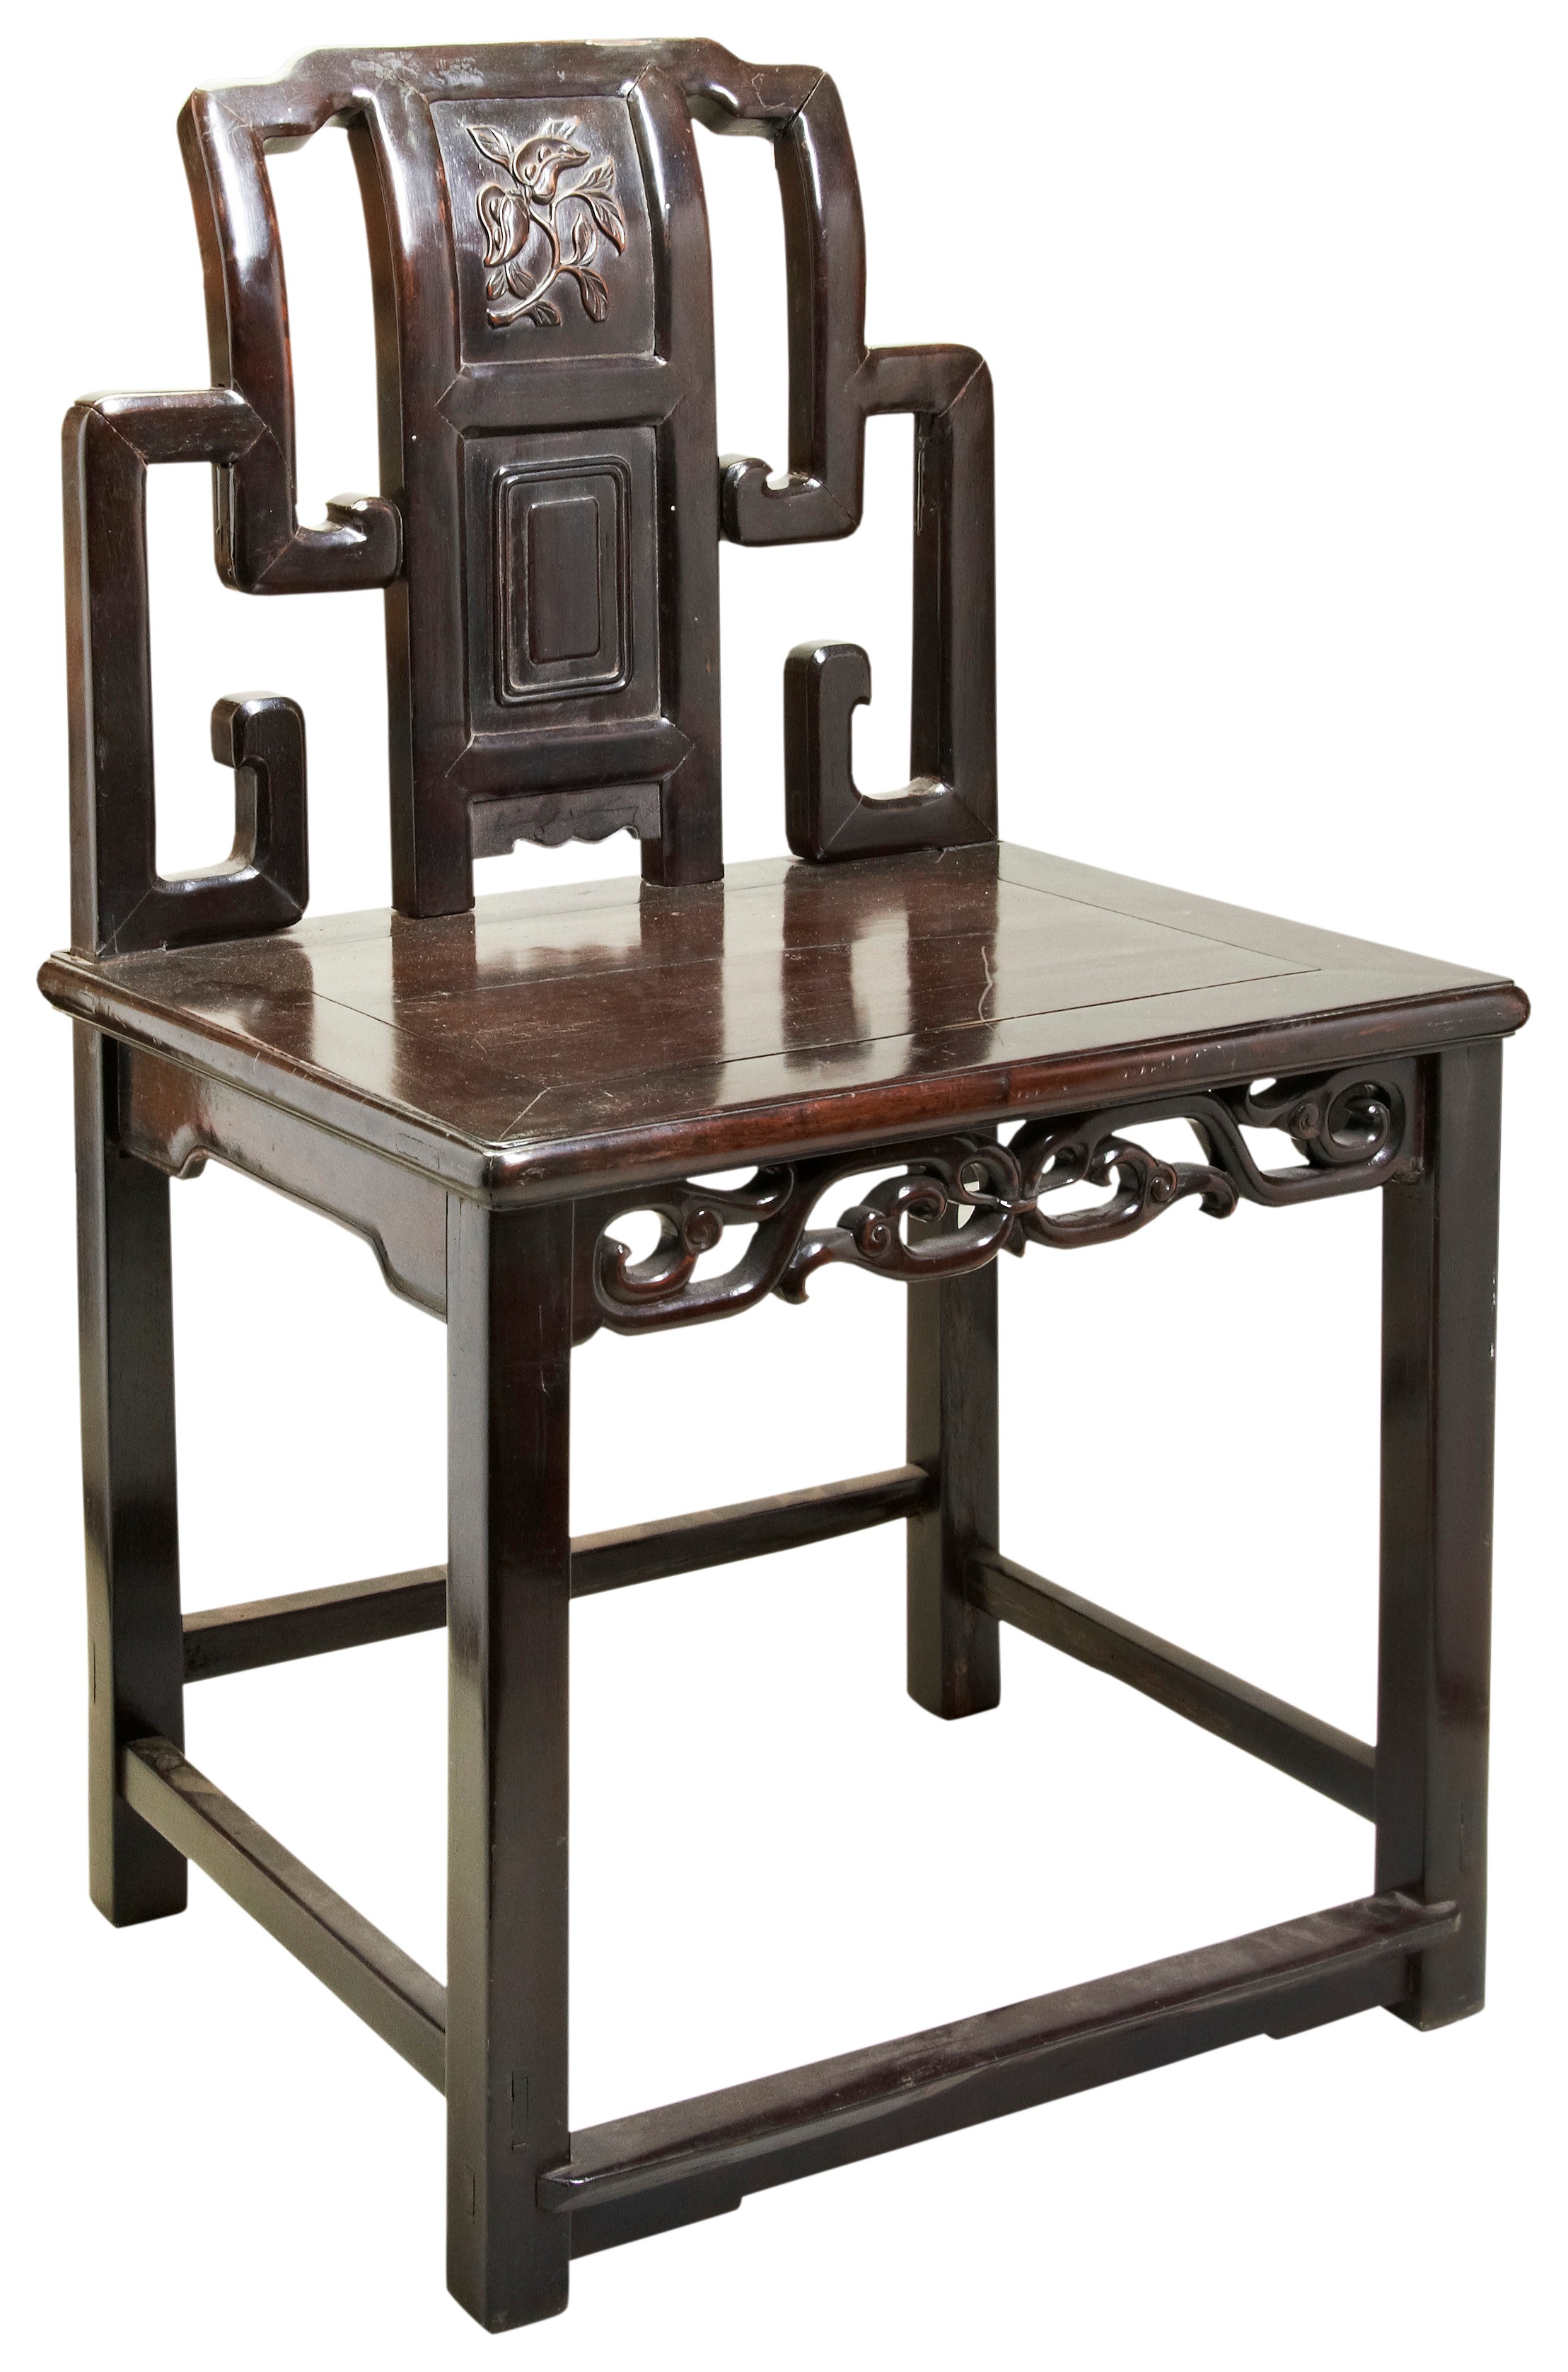 CARVED HUALI-HARDWOOD SIDE CHAIR LATE QING DYNASTY the shaped panel back carved with peaches, over a